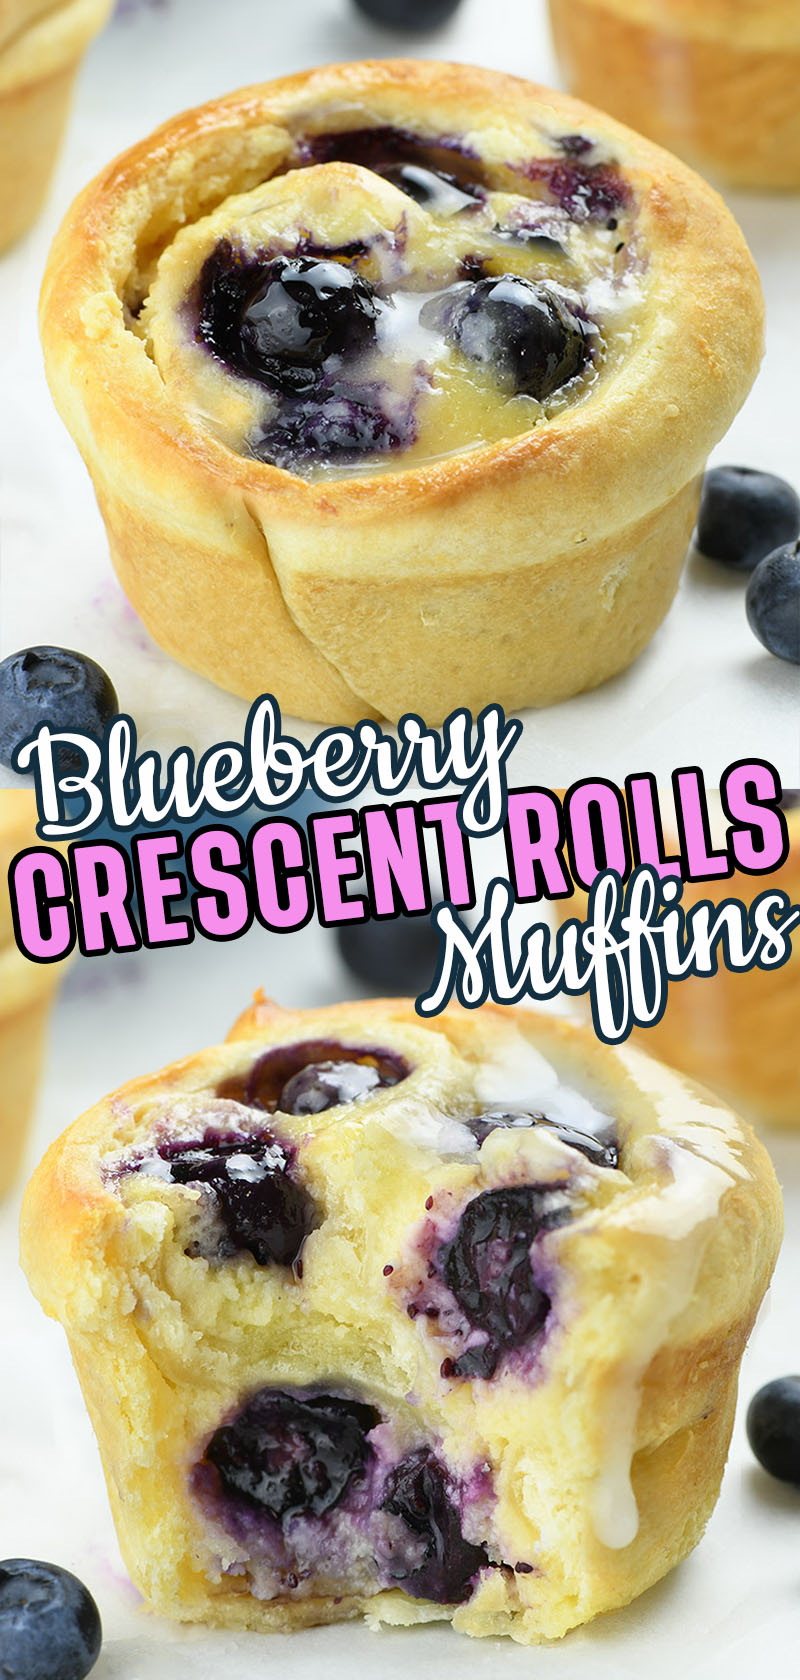 Blueberry Crescent Roll Muffins